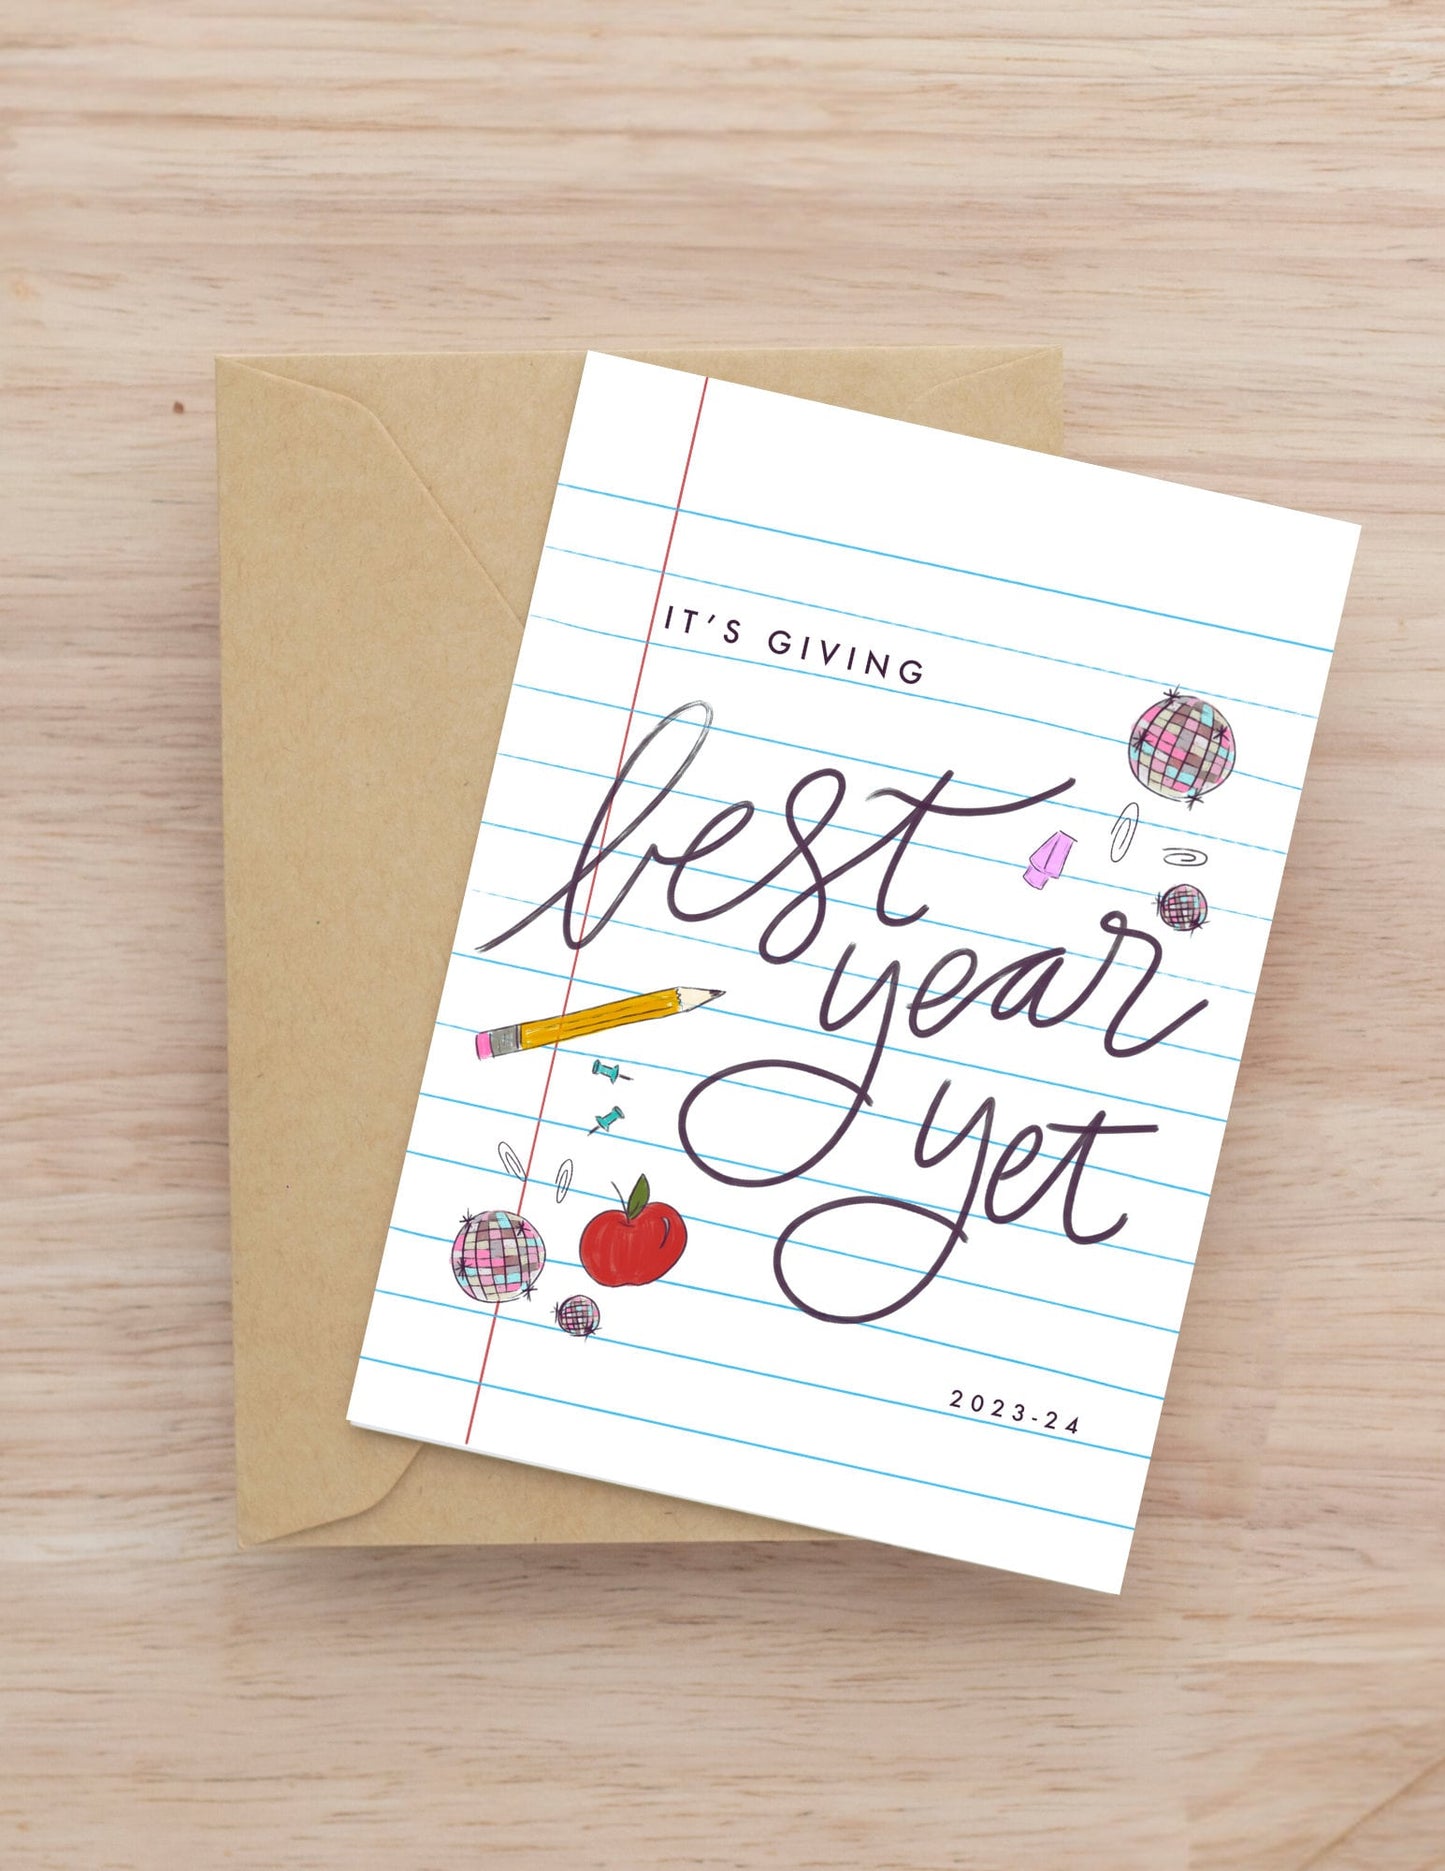 It's giving Best Year Yet back to school teacher greeting card